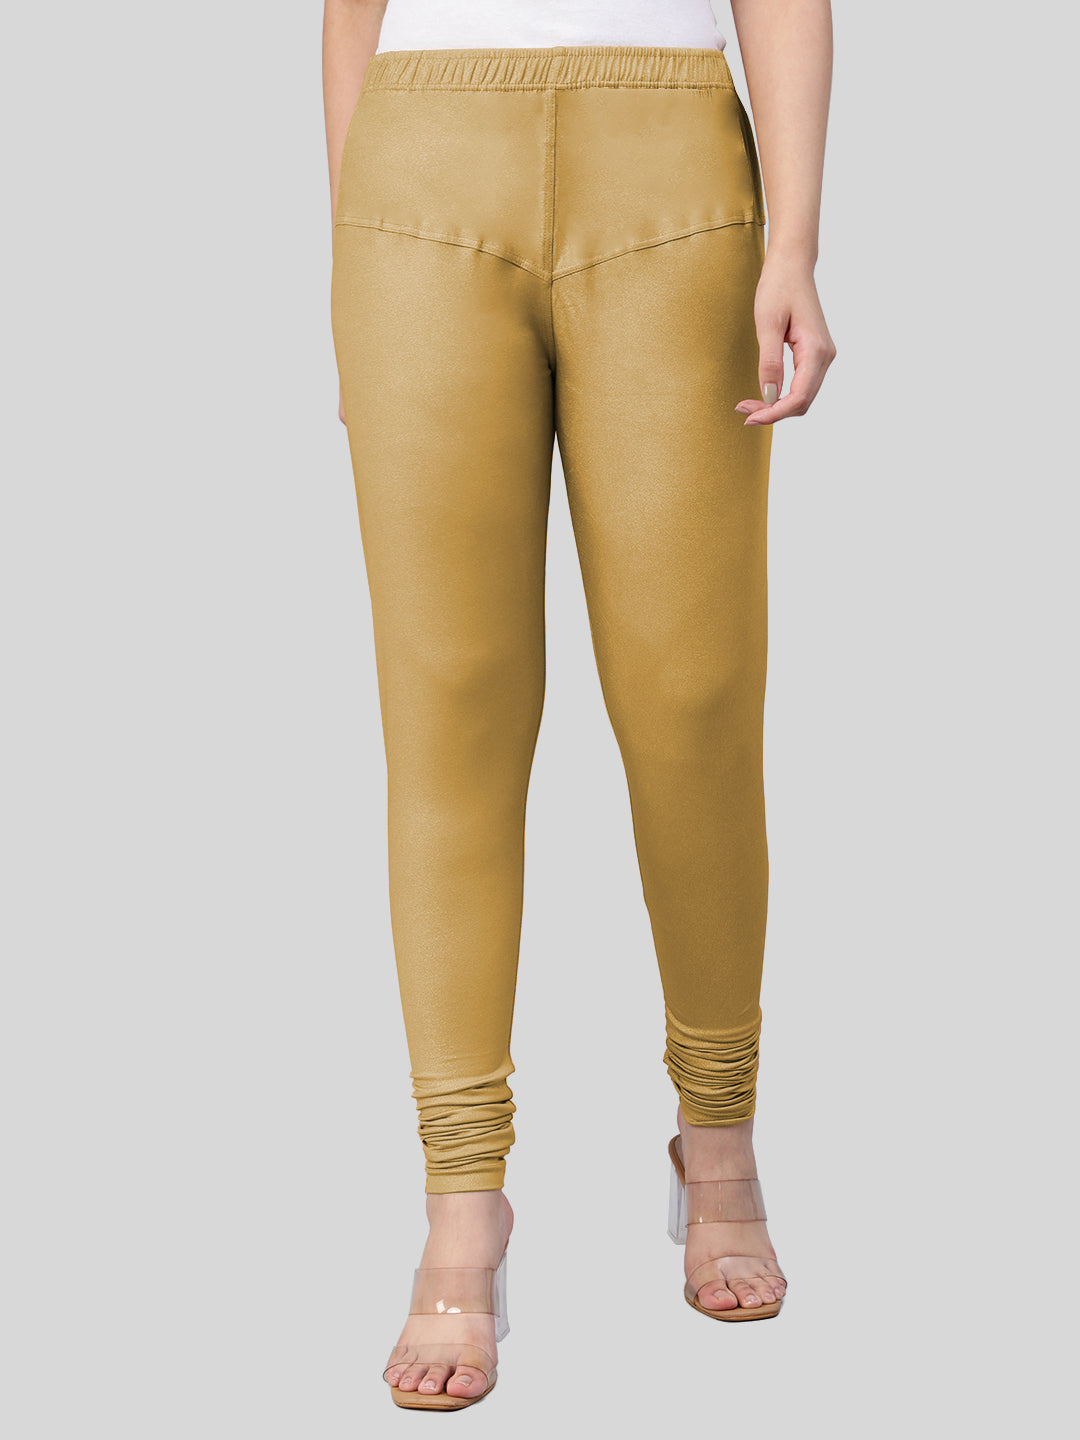 TWIN BIRDS Nylon Lycra Casual Legging (2XL, Beige) in Hyderabad at best  price by Colourful Skins - Justdial